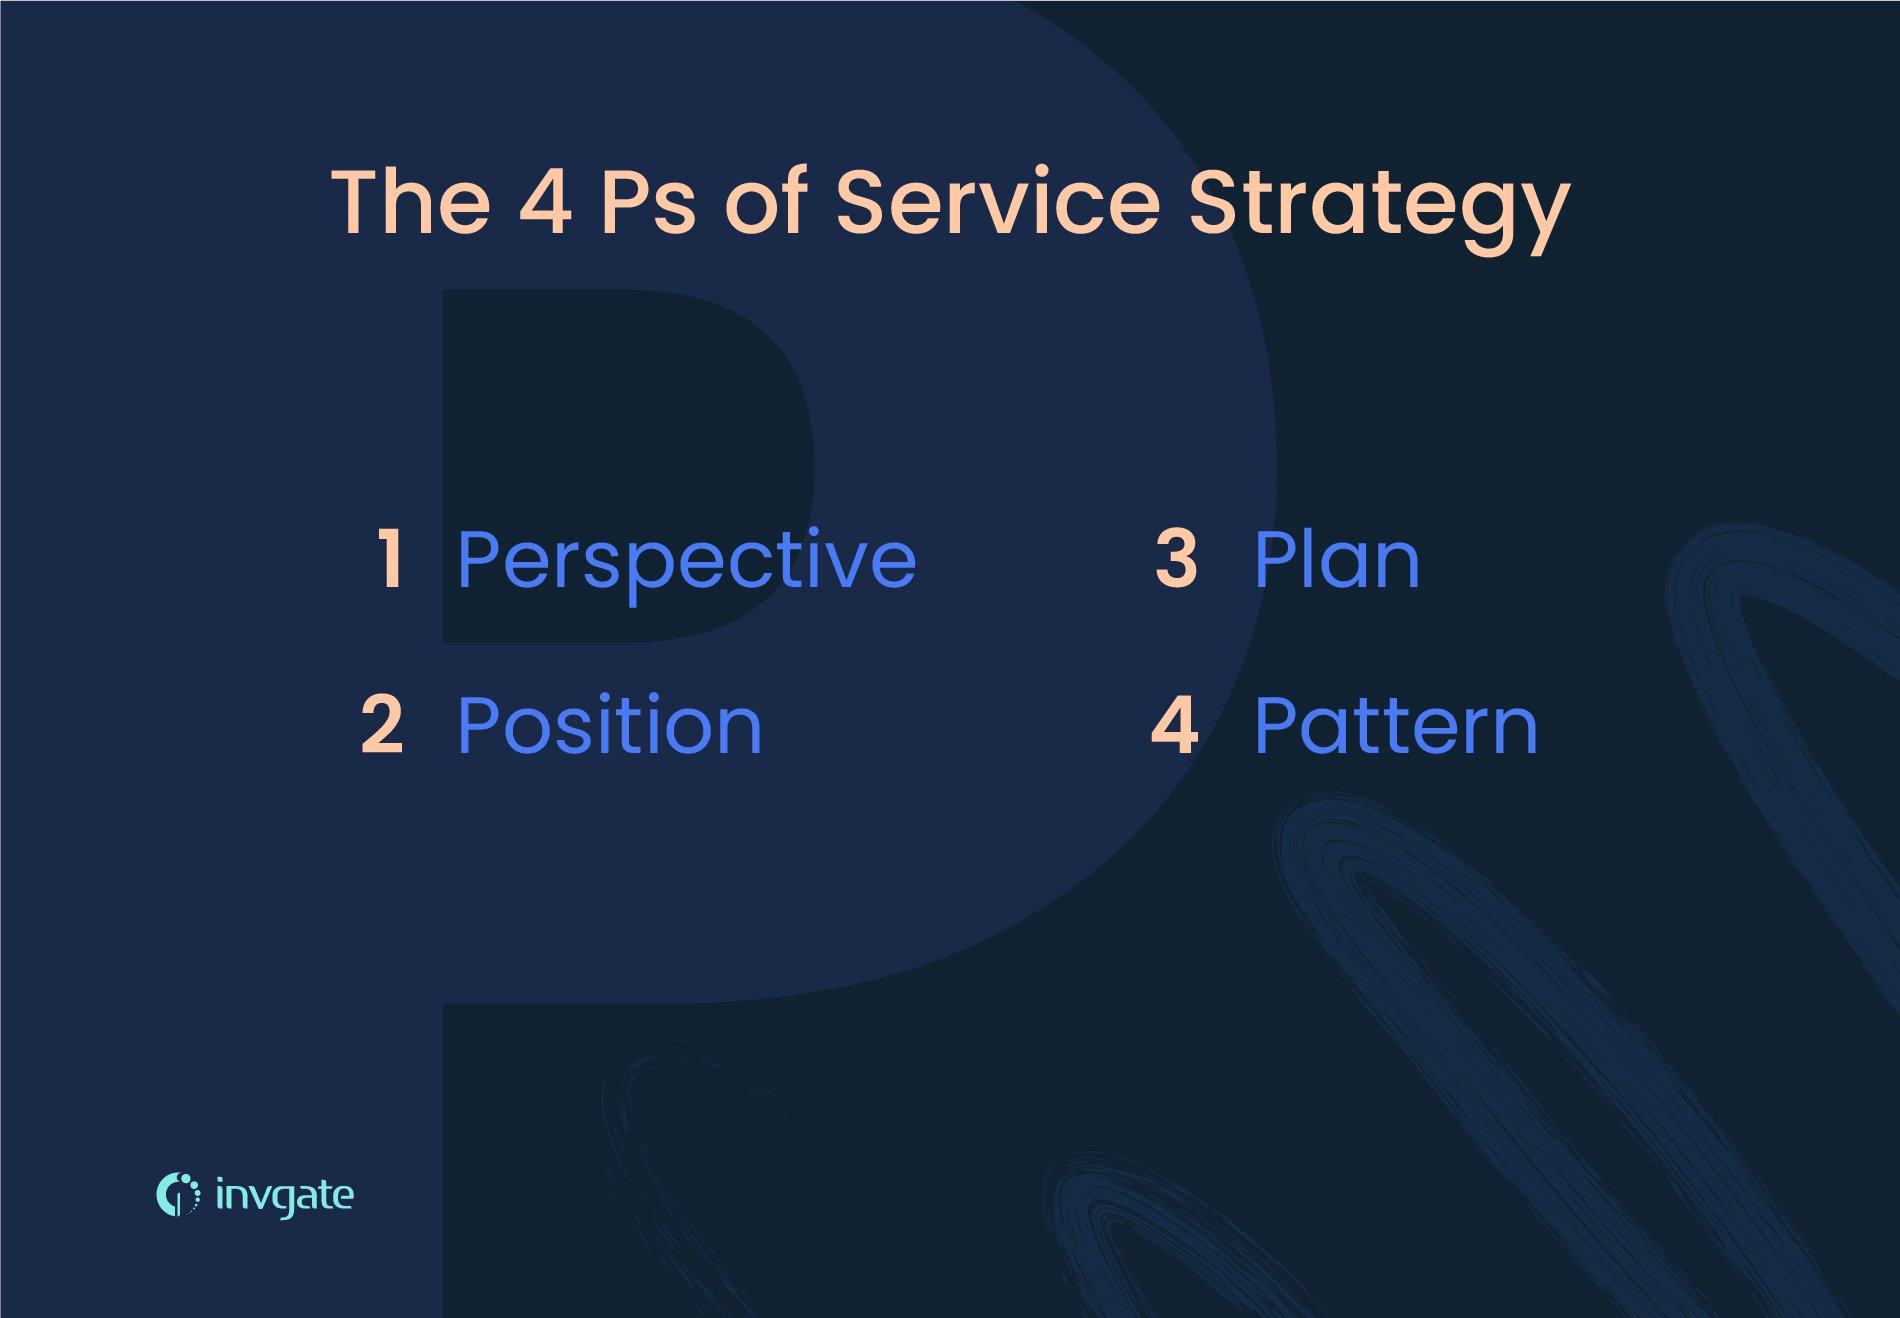 The 4 Ps of service strategy